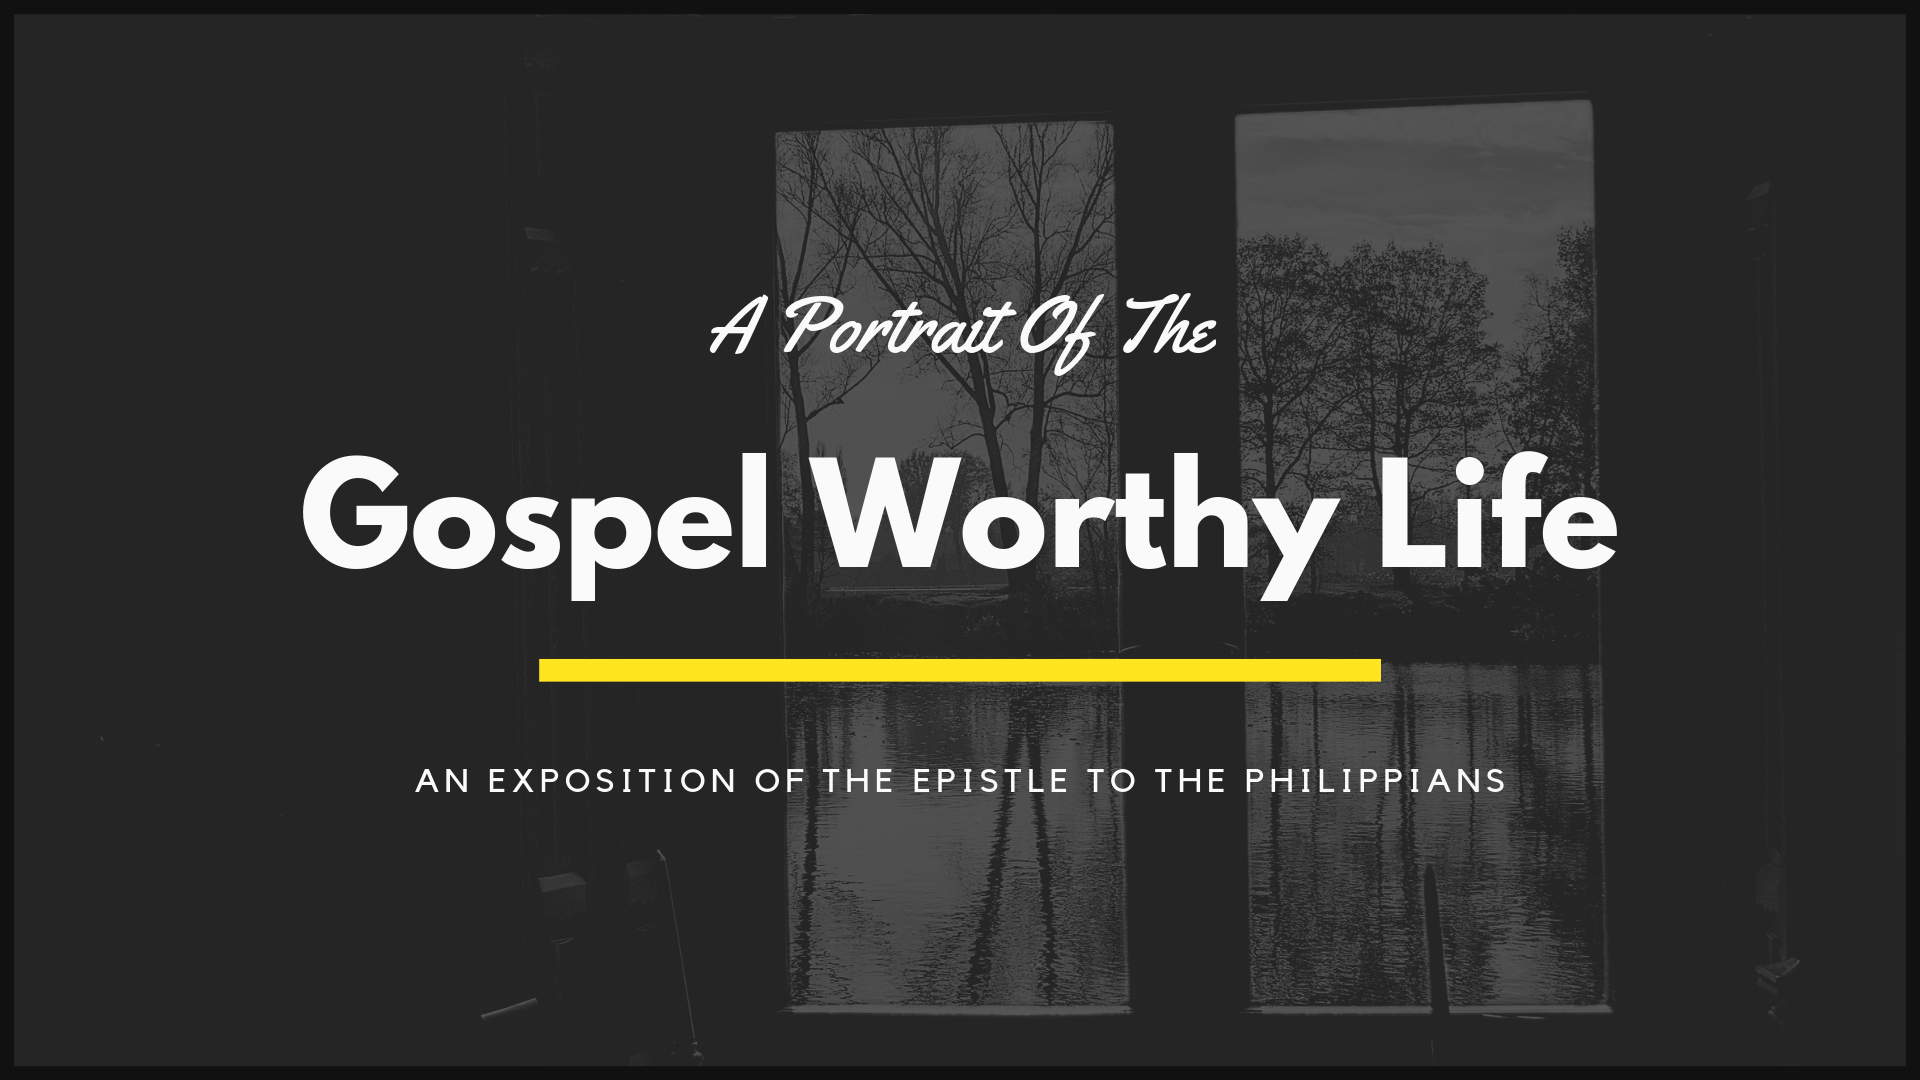 The Life Worthy of the Gospel, Part I